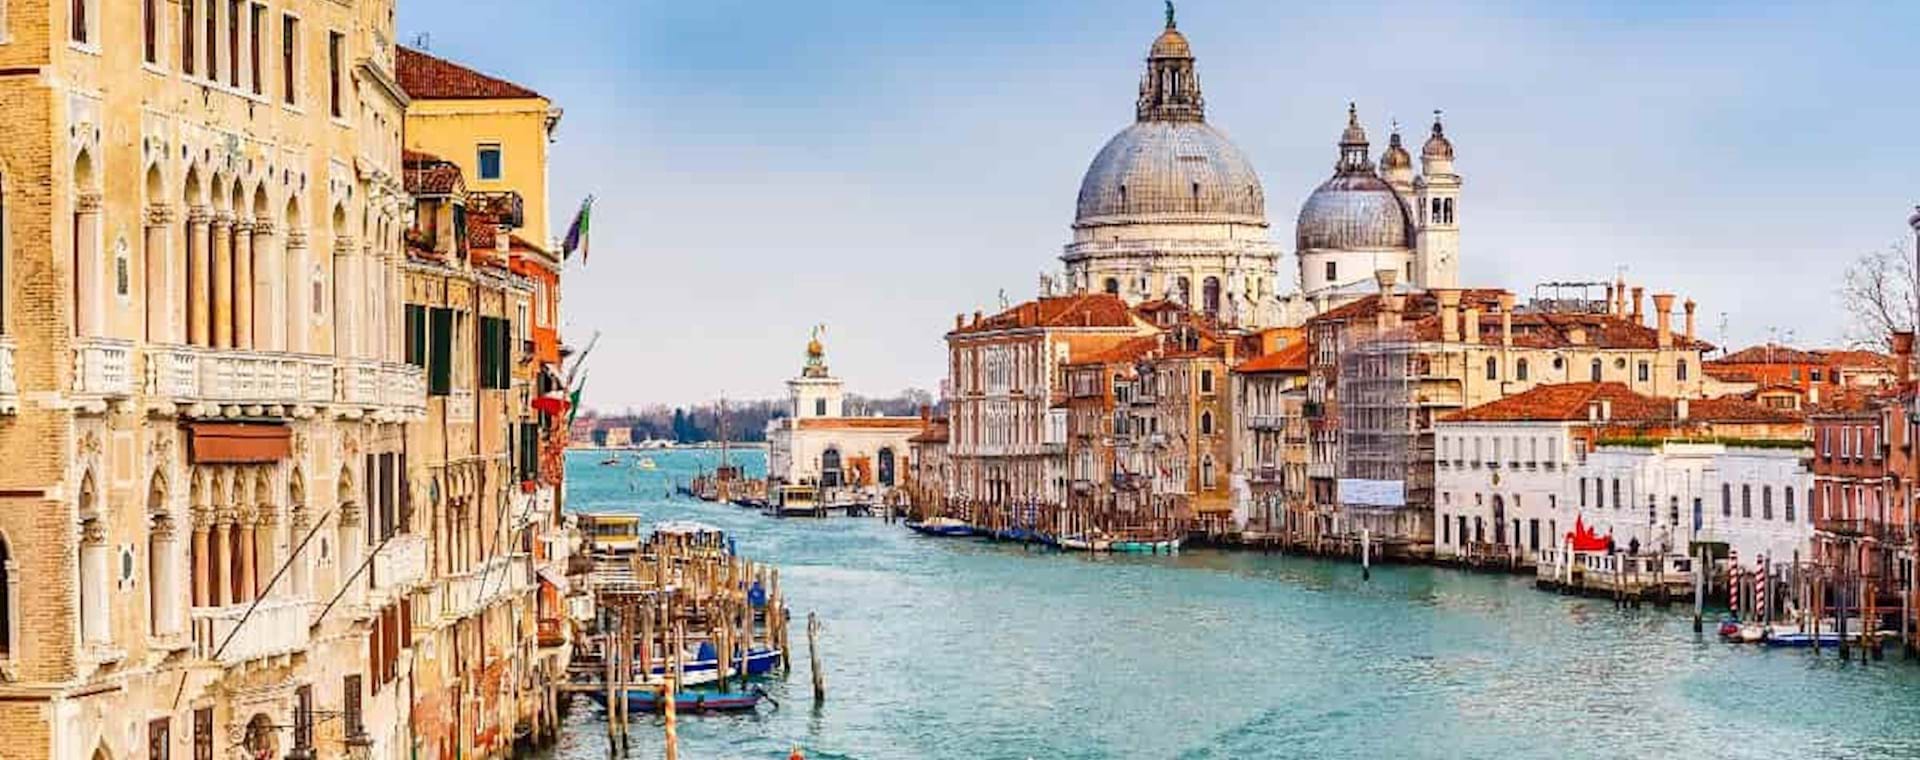 Venice from Rome Day Tour with St Mark's Basilica - City Wonders